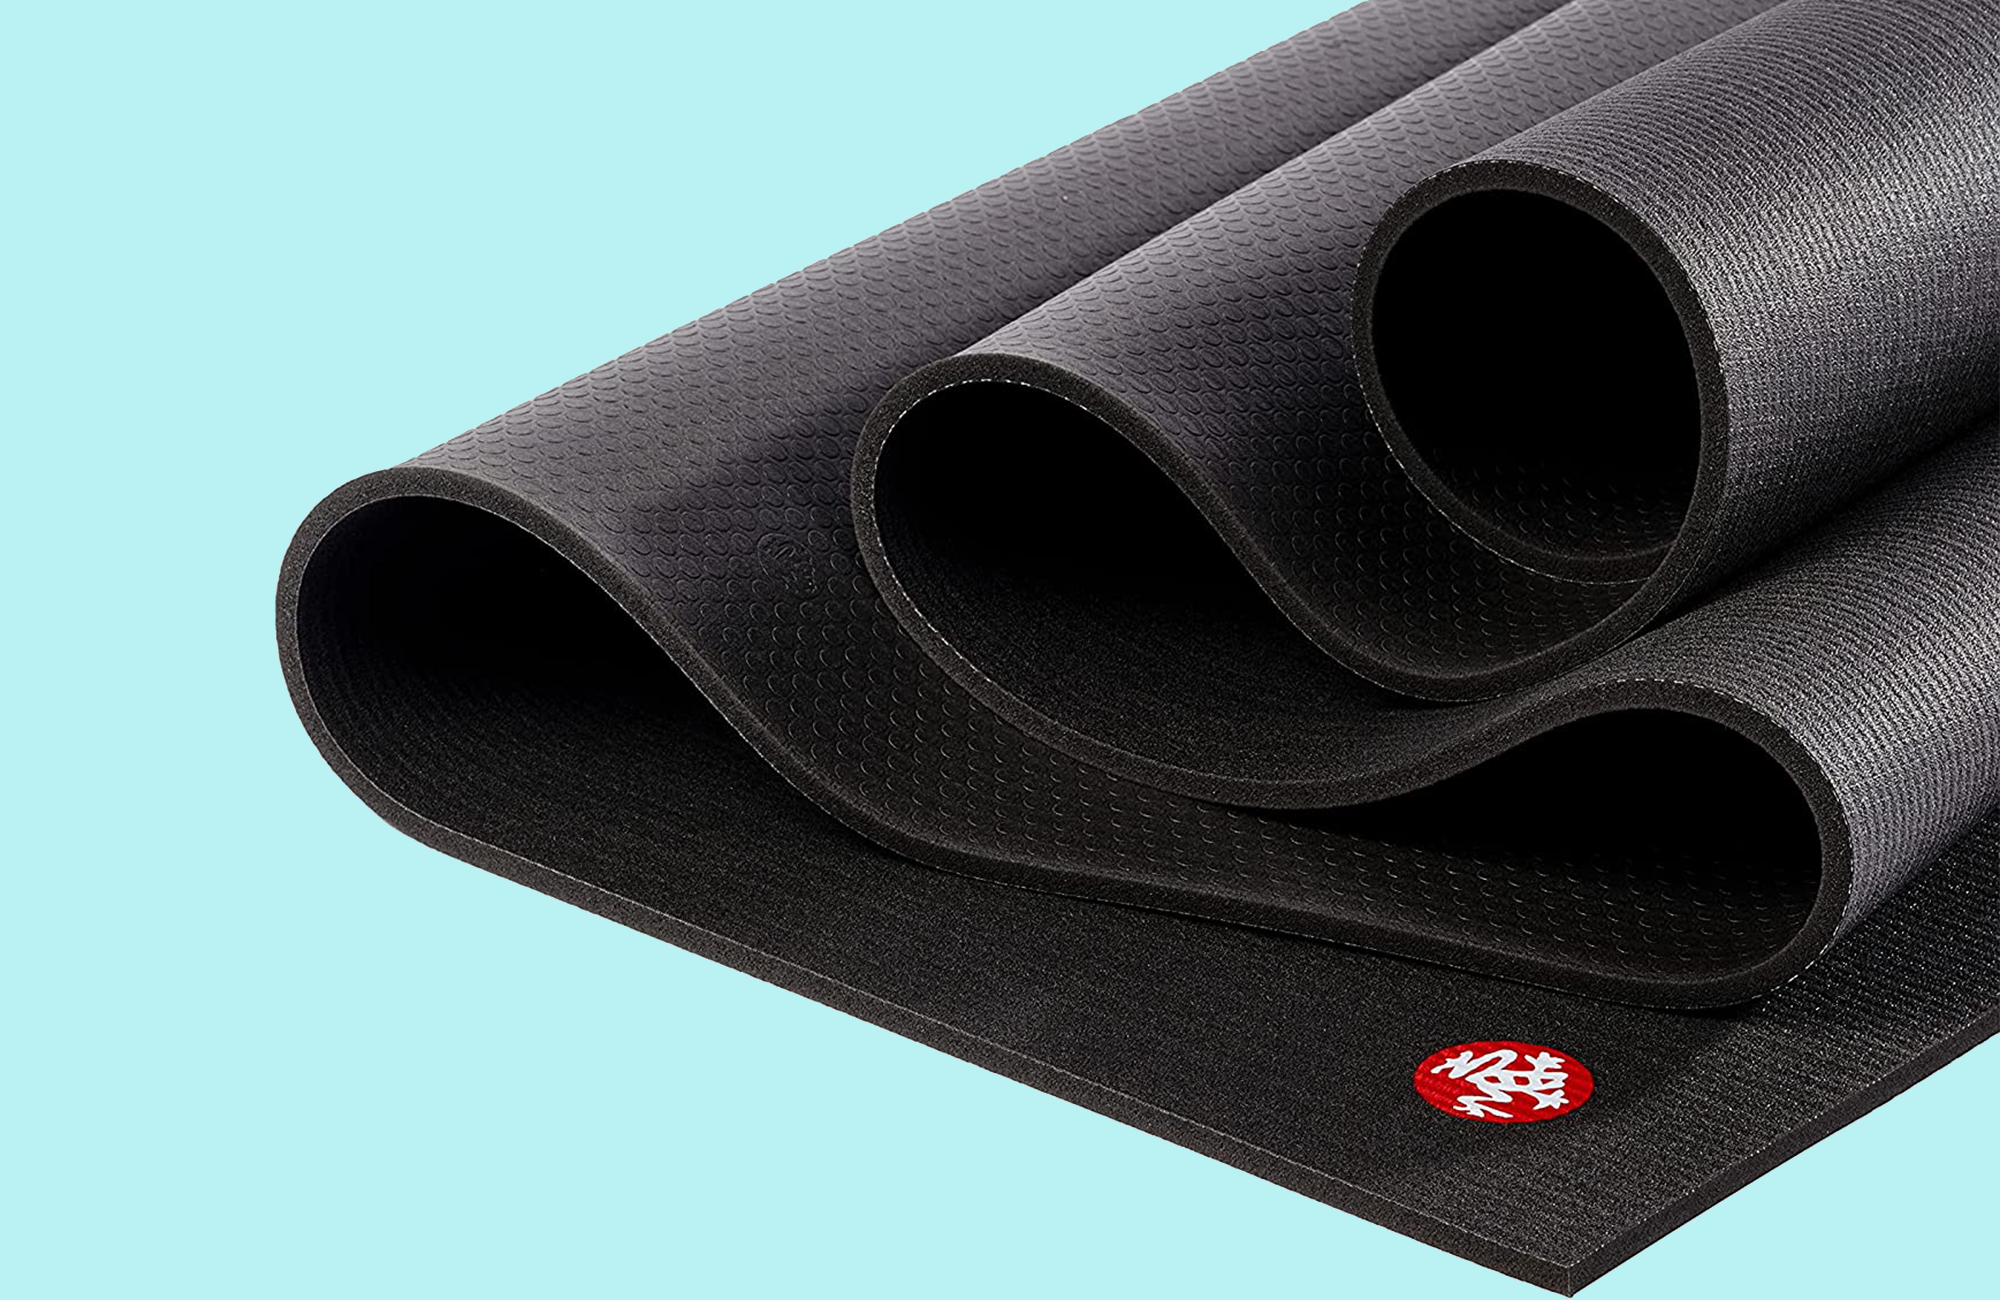 Best Yoga Mat (Reviews, Sizes and What To Buy) - Blue Osa Yoga Retreat + Spa